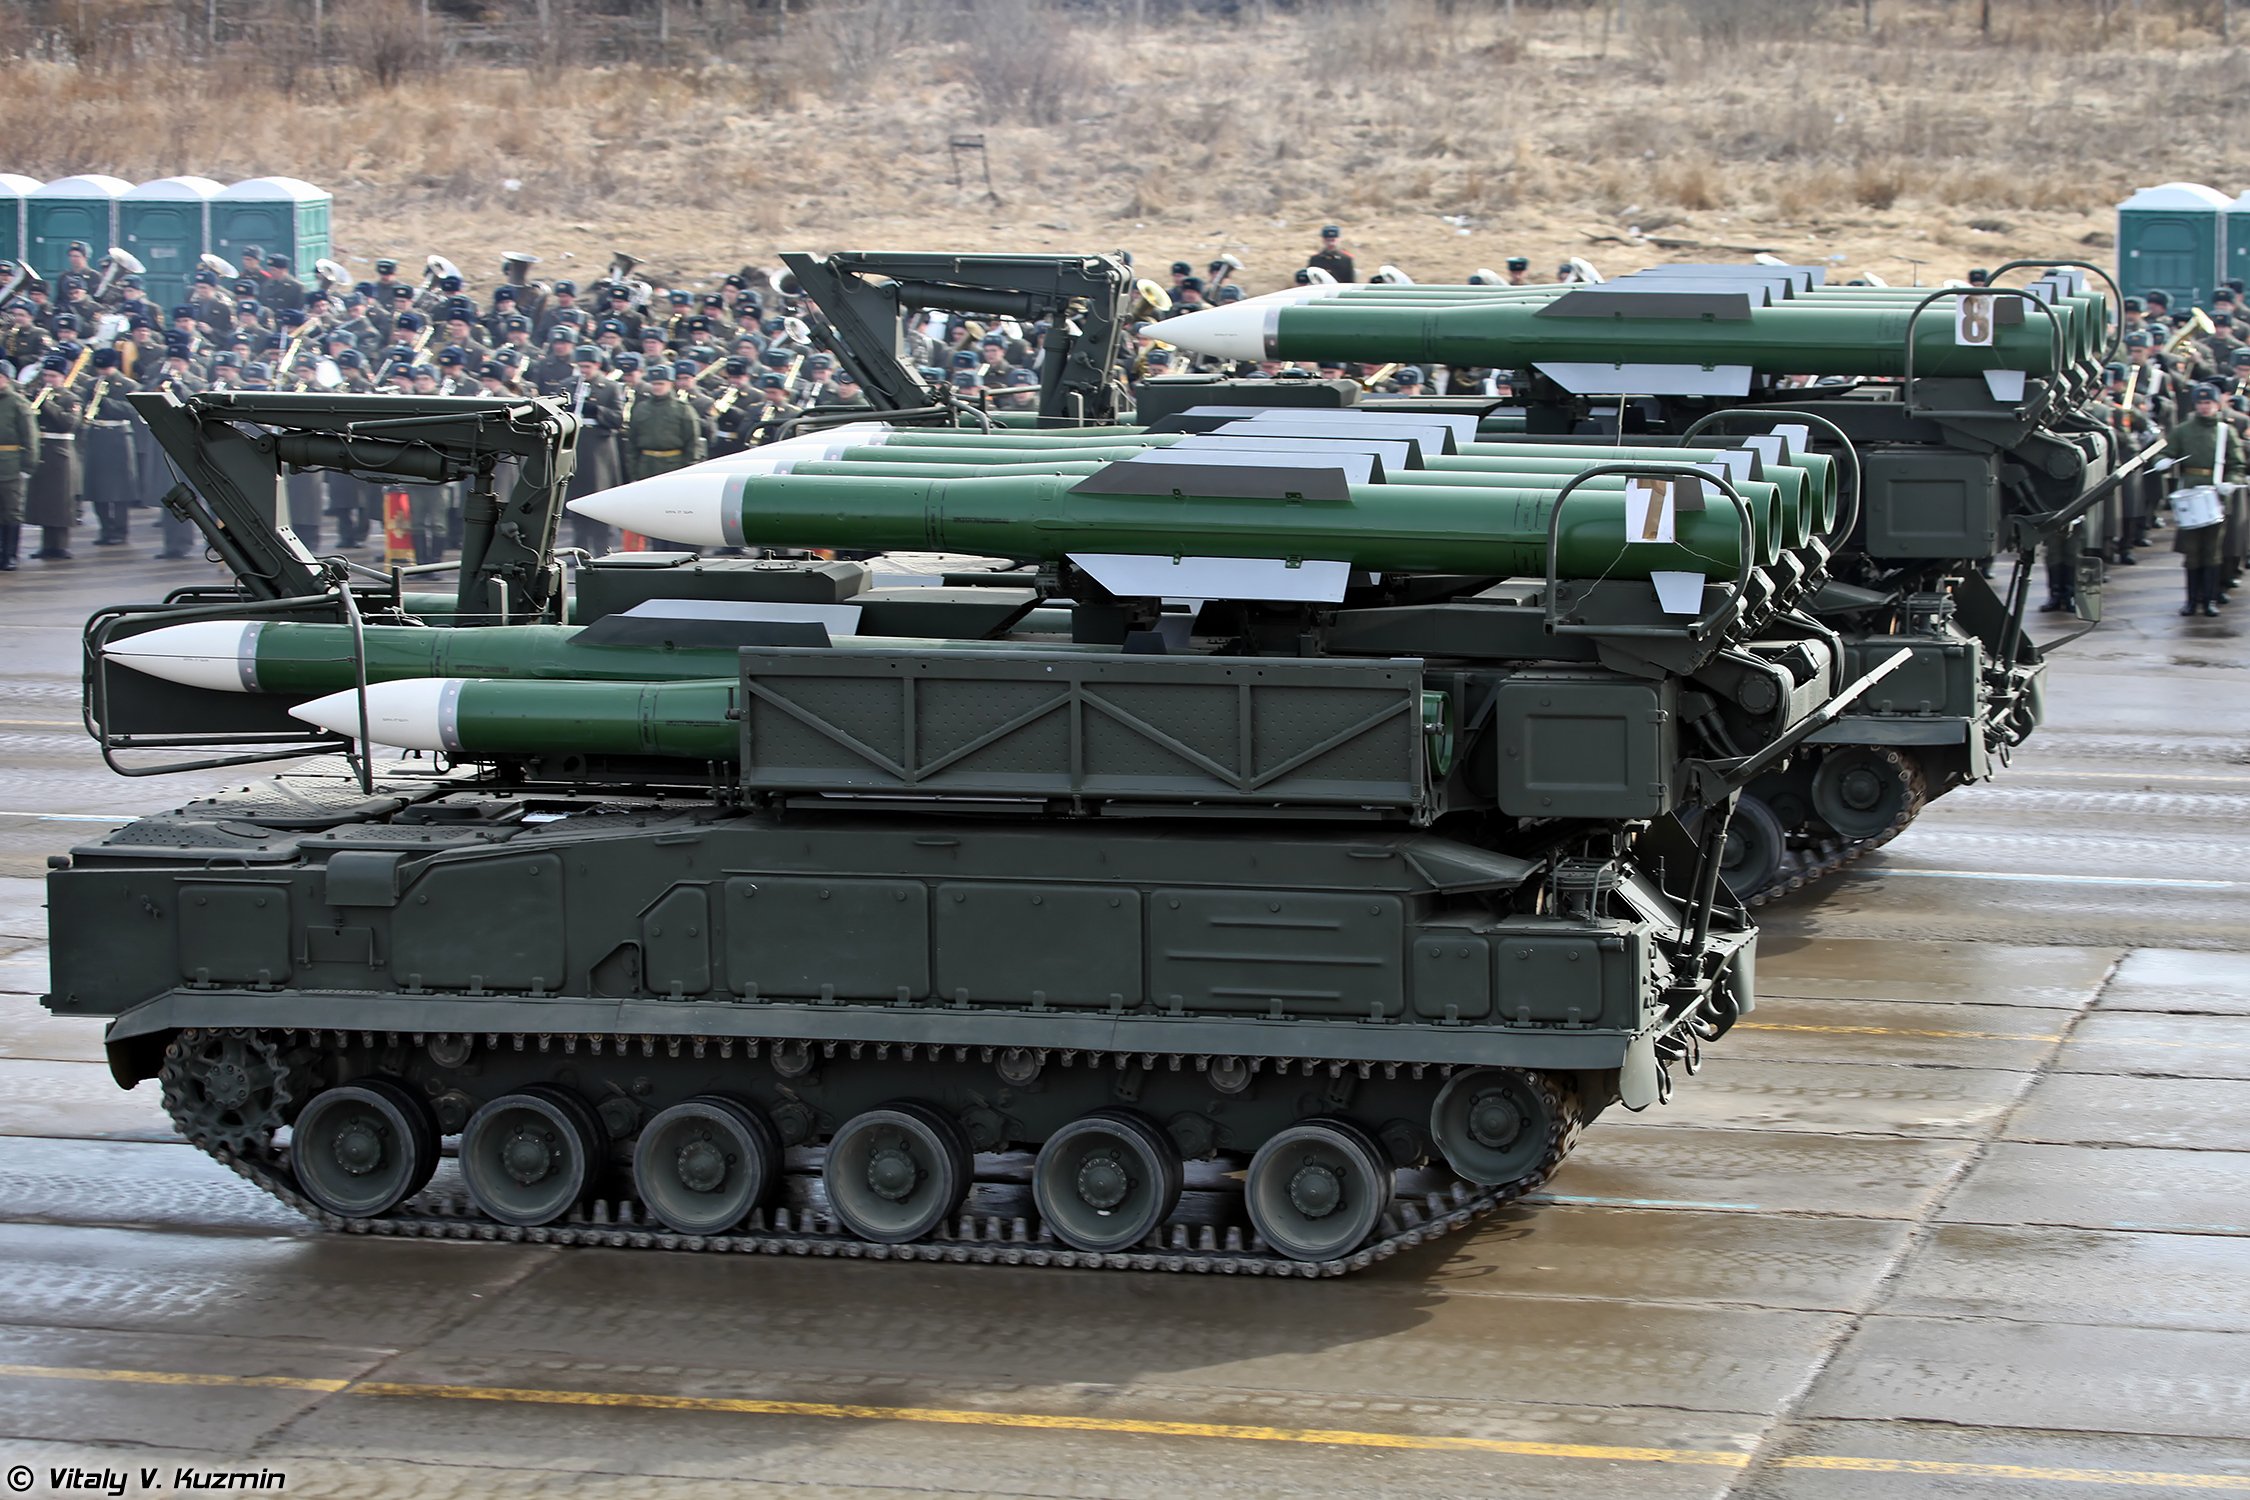 9a316, Transporter, Erector, Launcher, And, Transloader, For, Buk m2, Air, Defence, System, Missile, April, 9th, Rehearsal, In, Alabino, Of, 2014, Victory, Day, Parade, Russia, Military, Army, Russian Wallpaper